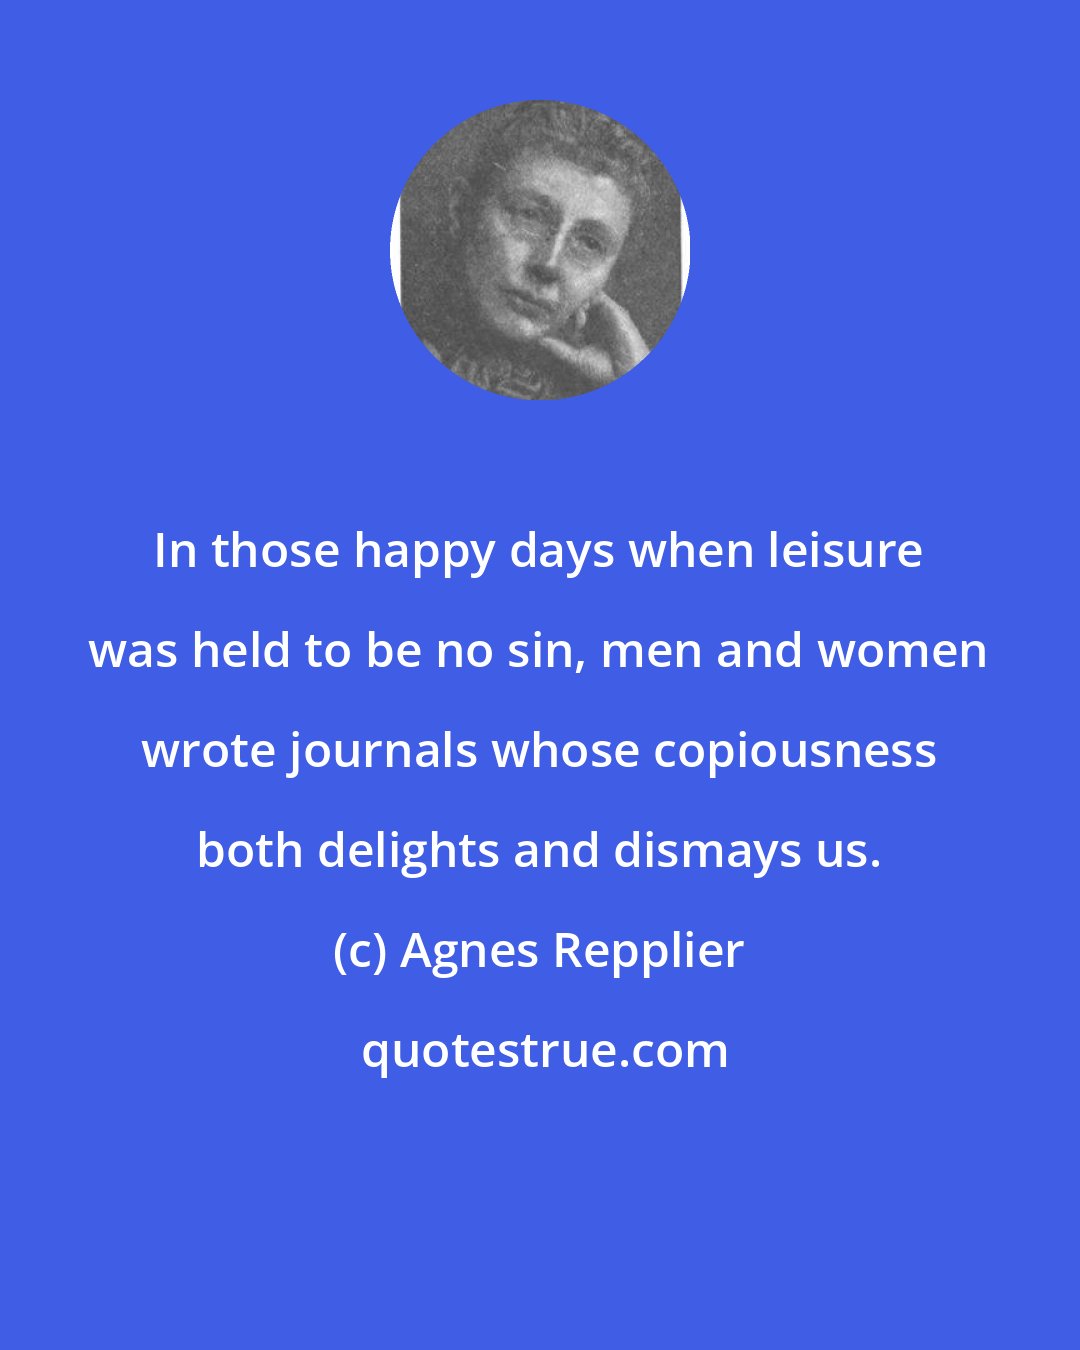 Agnes Repplier: In those happy days when leisure was held to be no sin, men and women wrote journals whose copiousness both delights and dismays us.